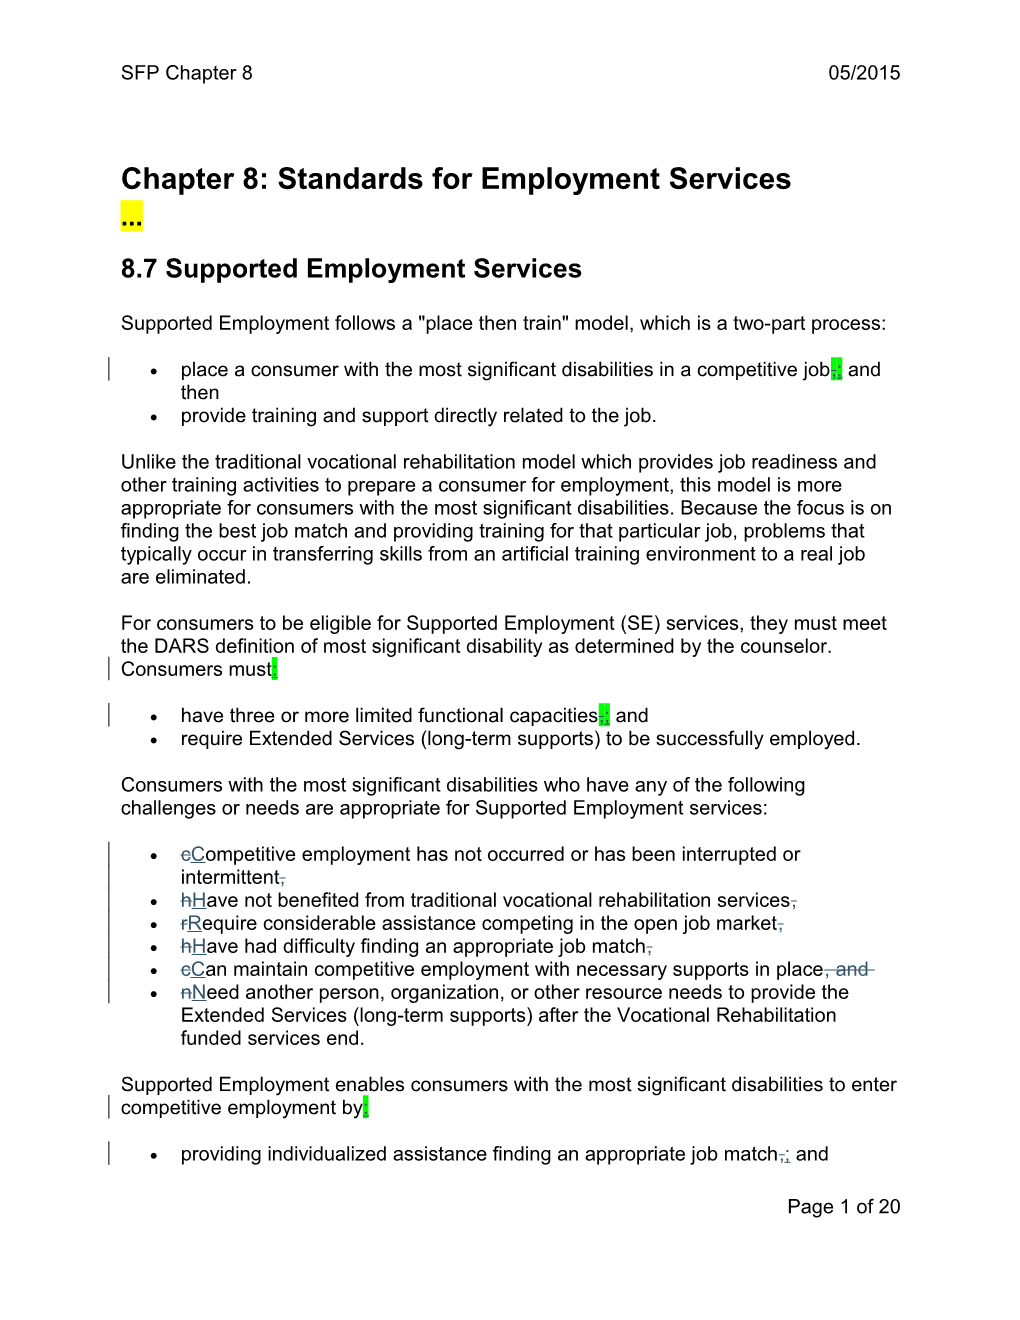 Chapter 8: Standards for Employment Services